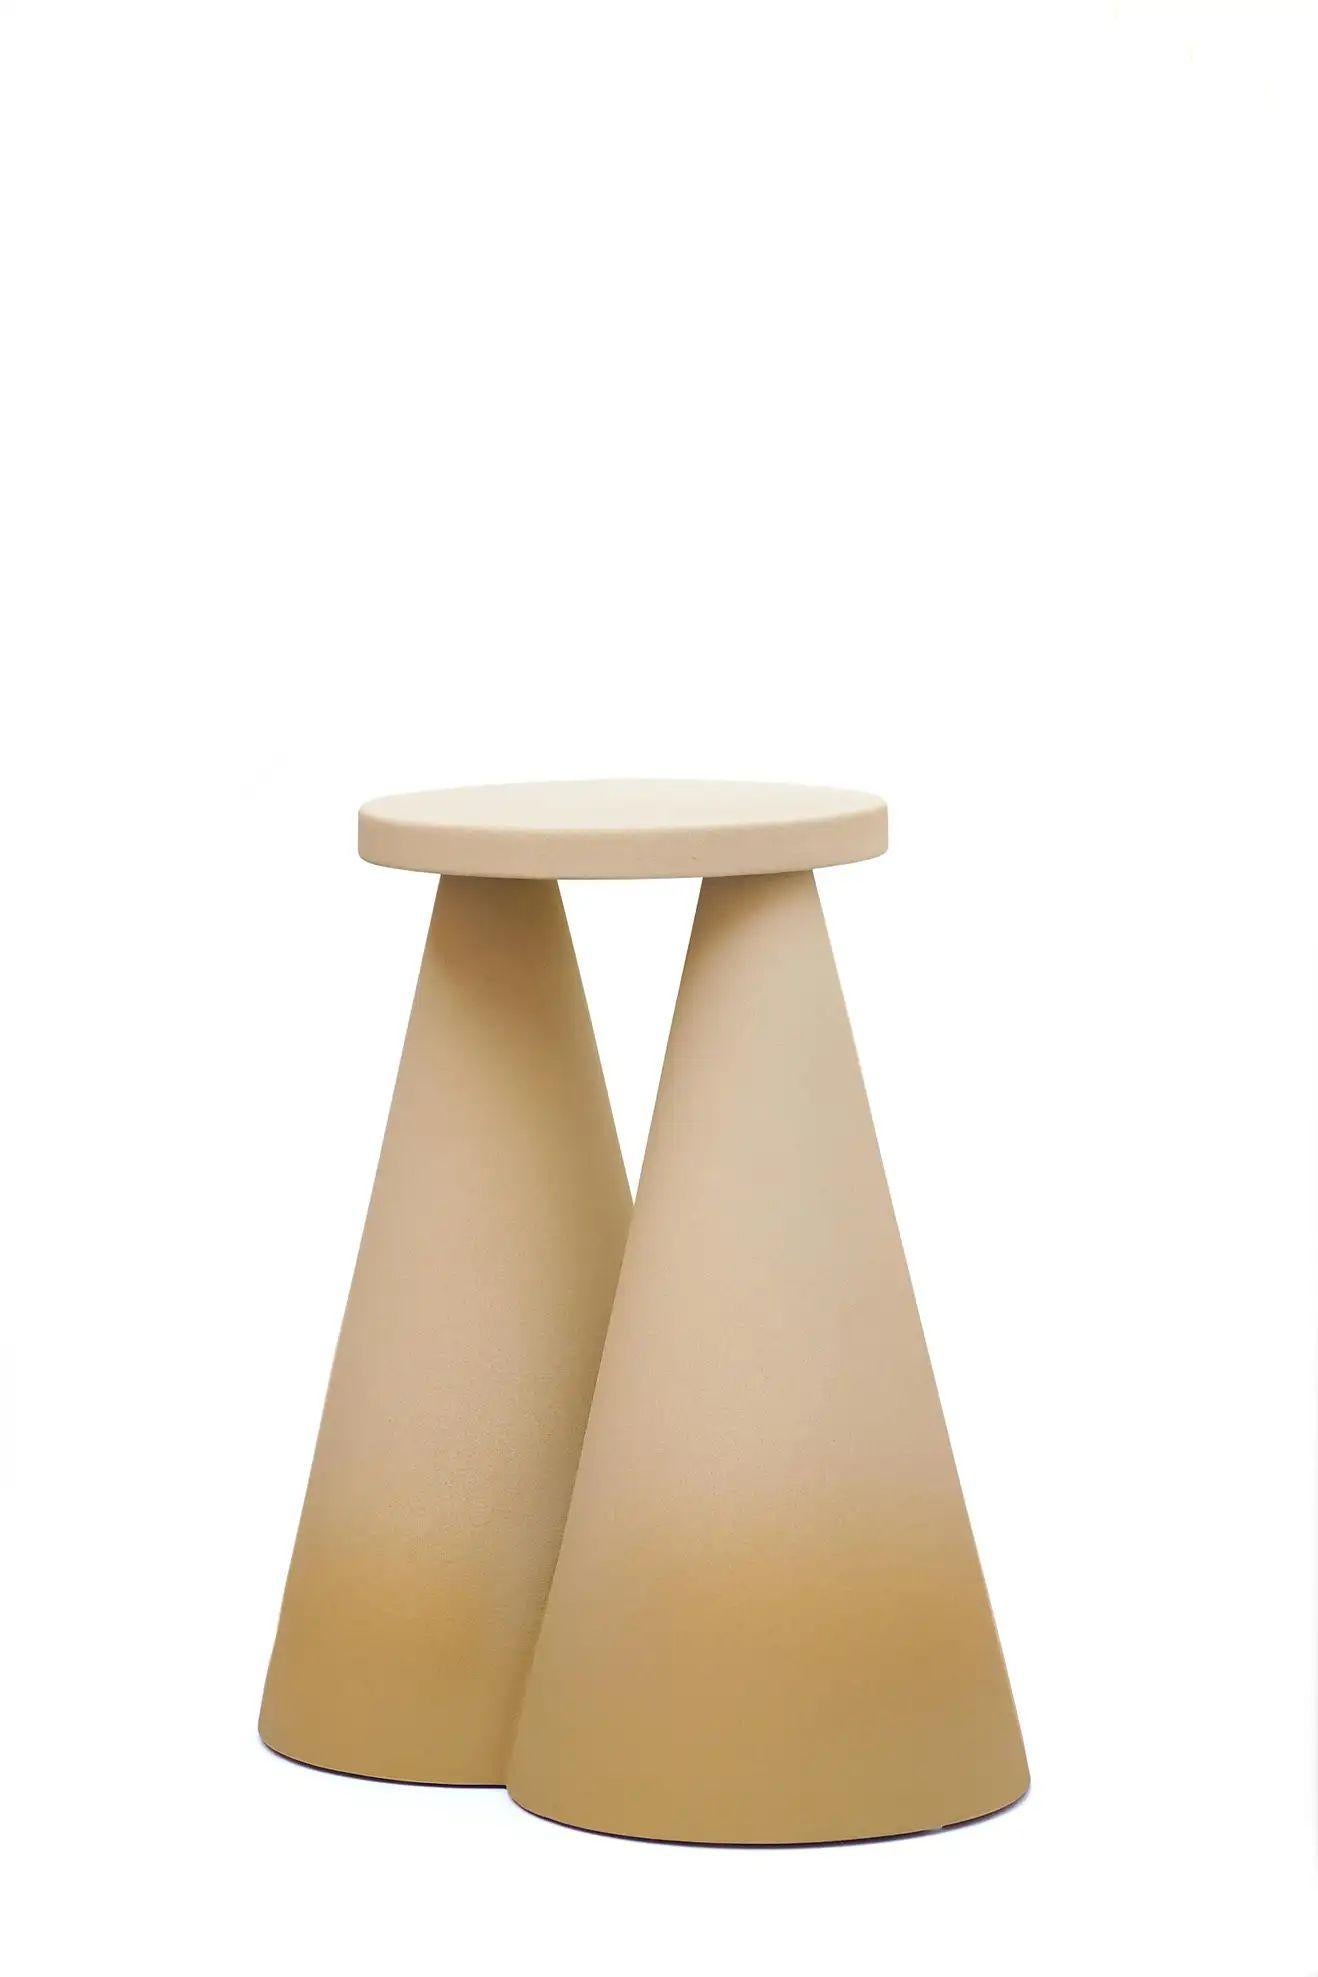 Ceramic Isola Side Table by Cara Davide